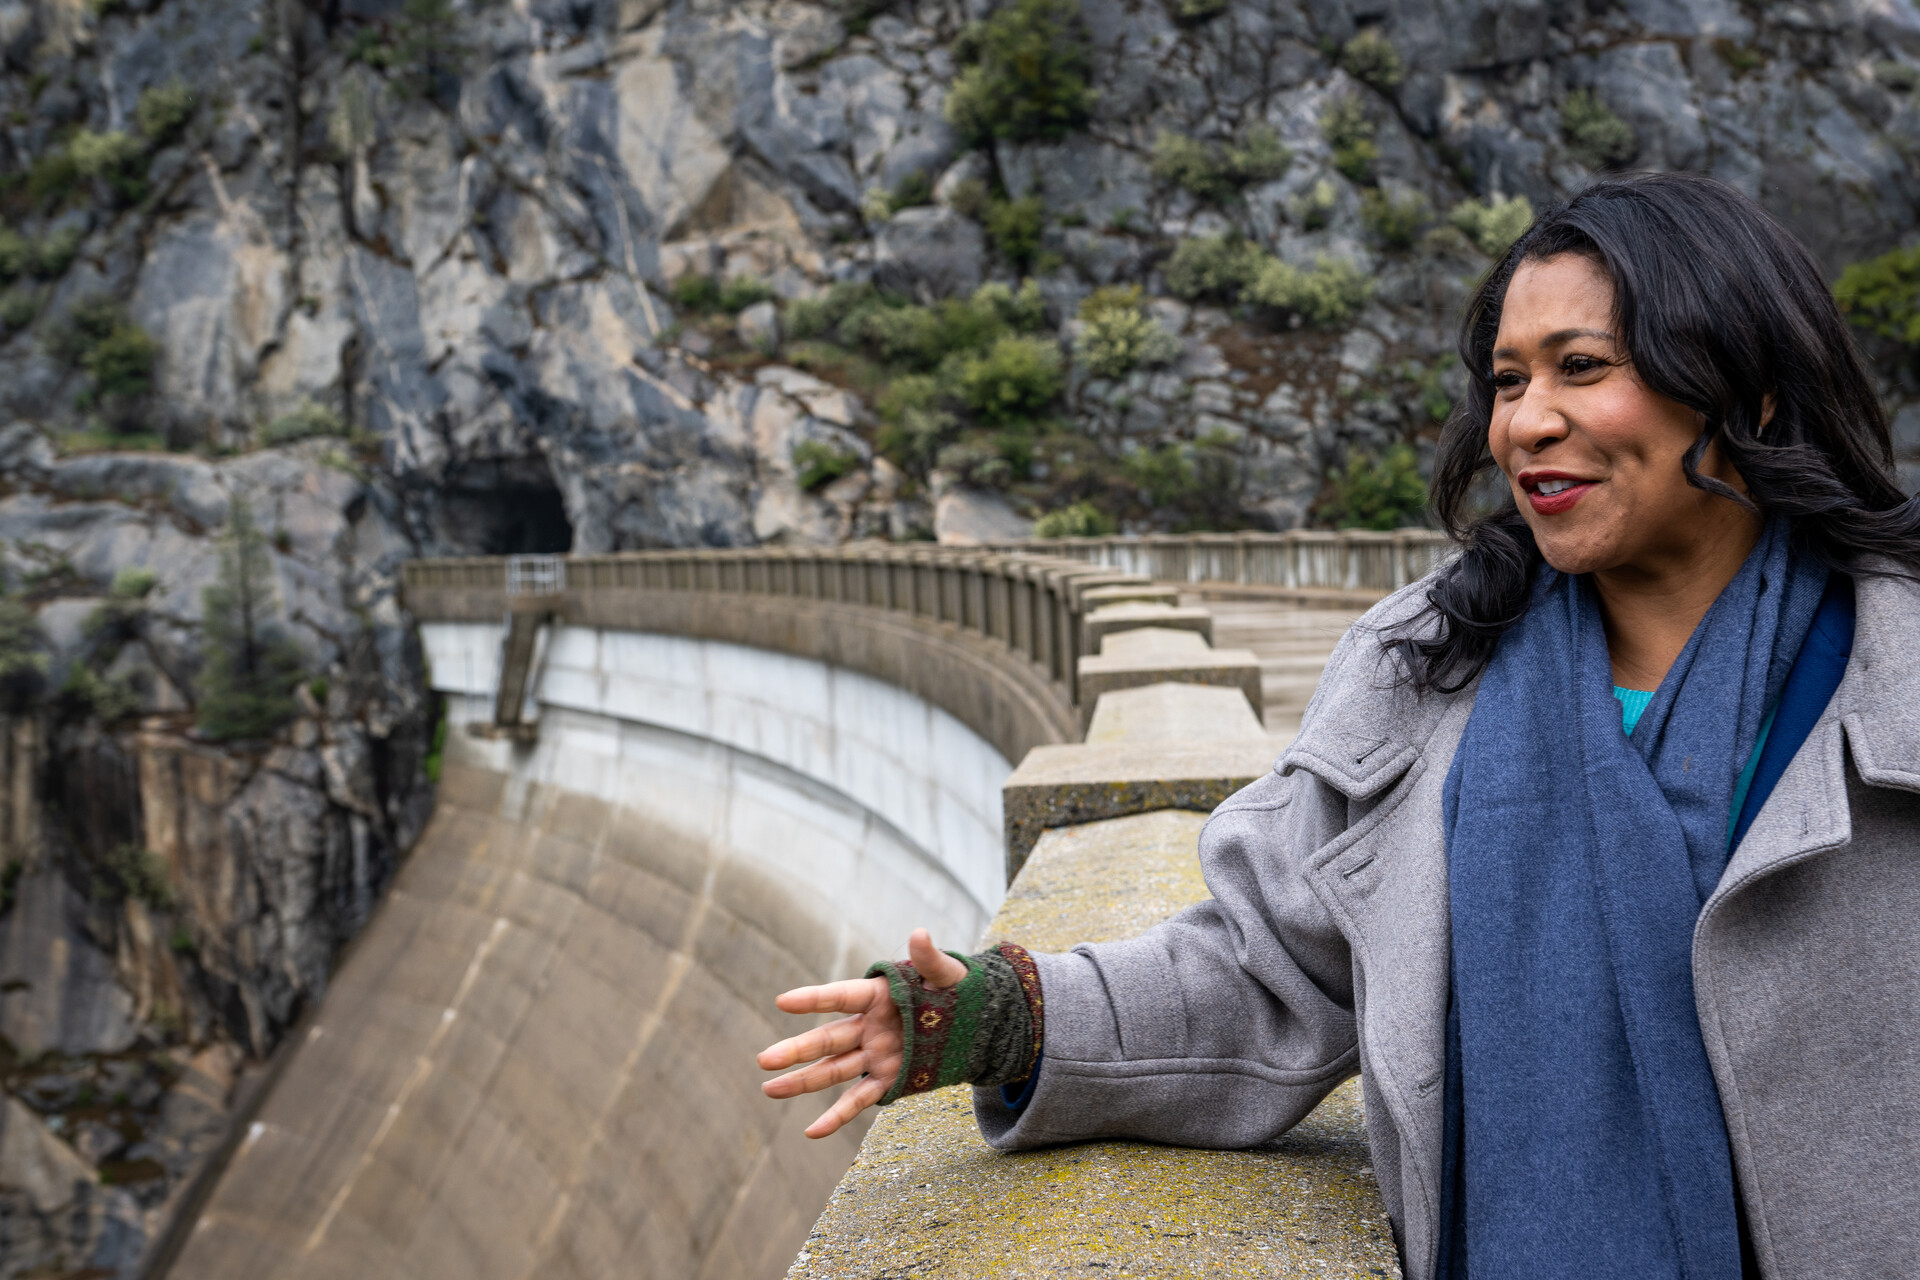 A smiling Black woman speaks while gesturing with one hand, wearing a fingerless glove and gray jacket, as the curving concrete arc of a massive dam spreads out at eye level behind her